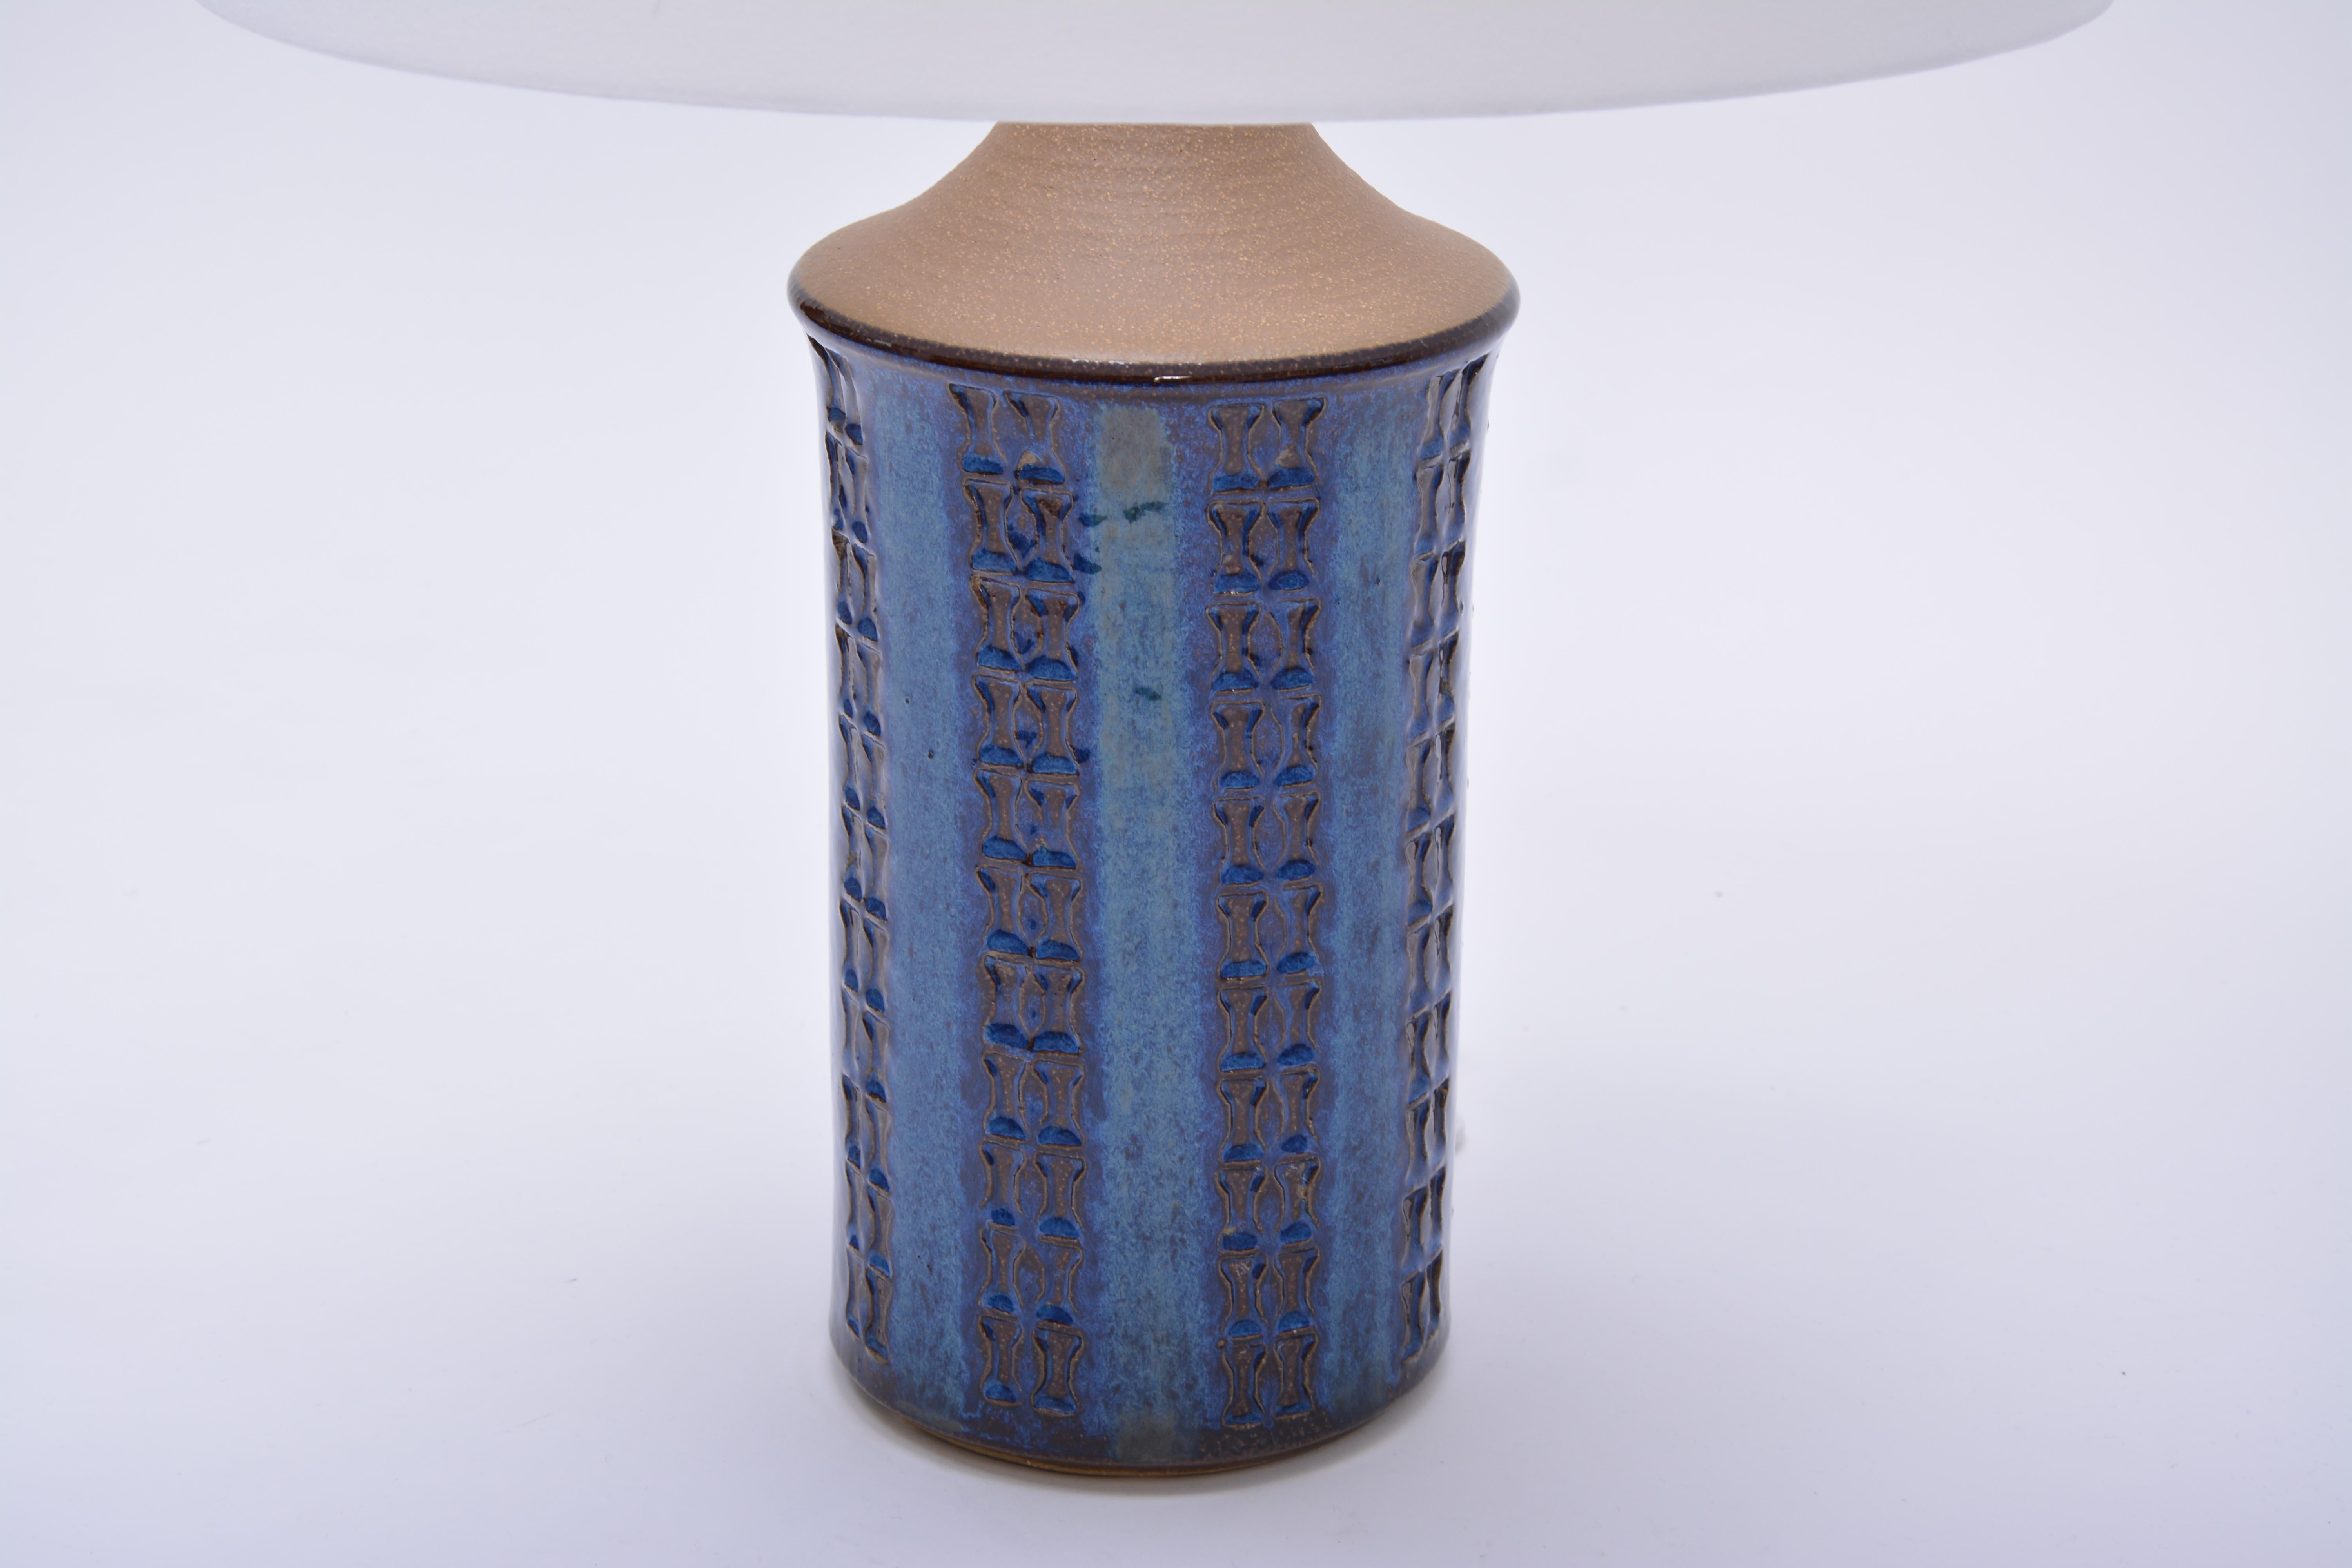 Vintage table lamp produced by Soholm Stentoj in the 1970s in Denmark. The lamp is made of stoneware and features a geographic pattern. Beautiful glaze in various tones of blue. The lamp has been rewired and has a new shade.